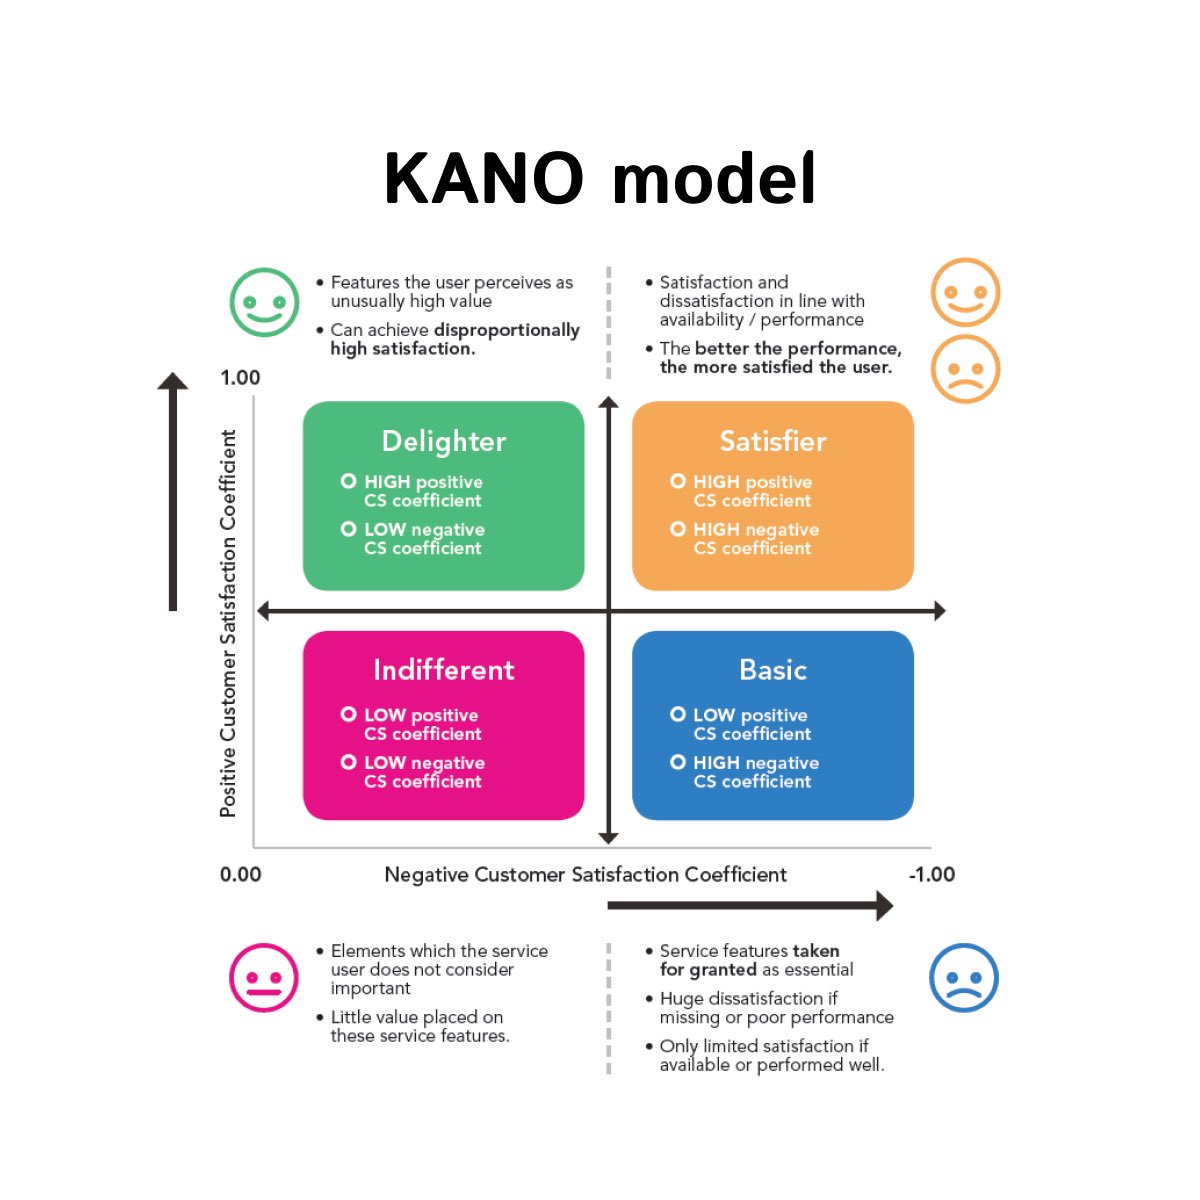 💎Kano Model for feature prioritization 

Kano Model is a framework used to prioritize features based on their impact on customer satisfaction